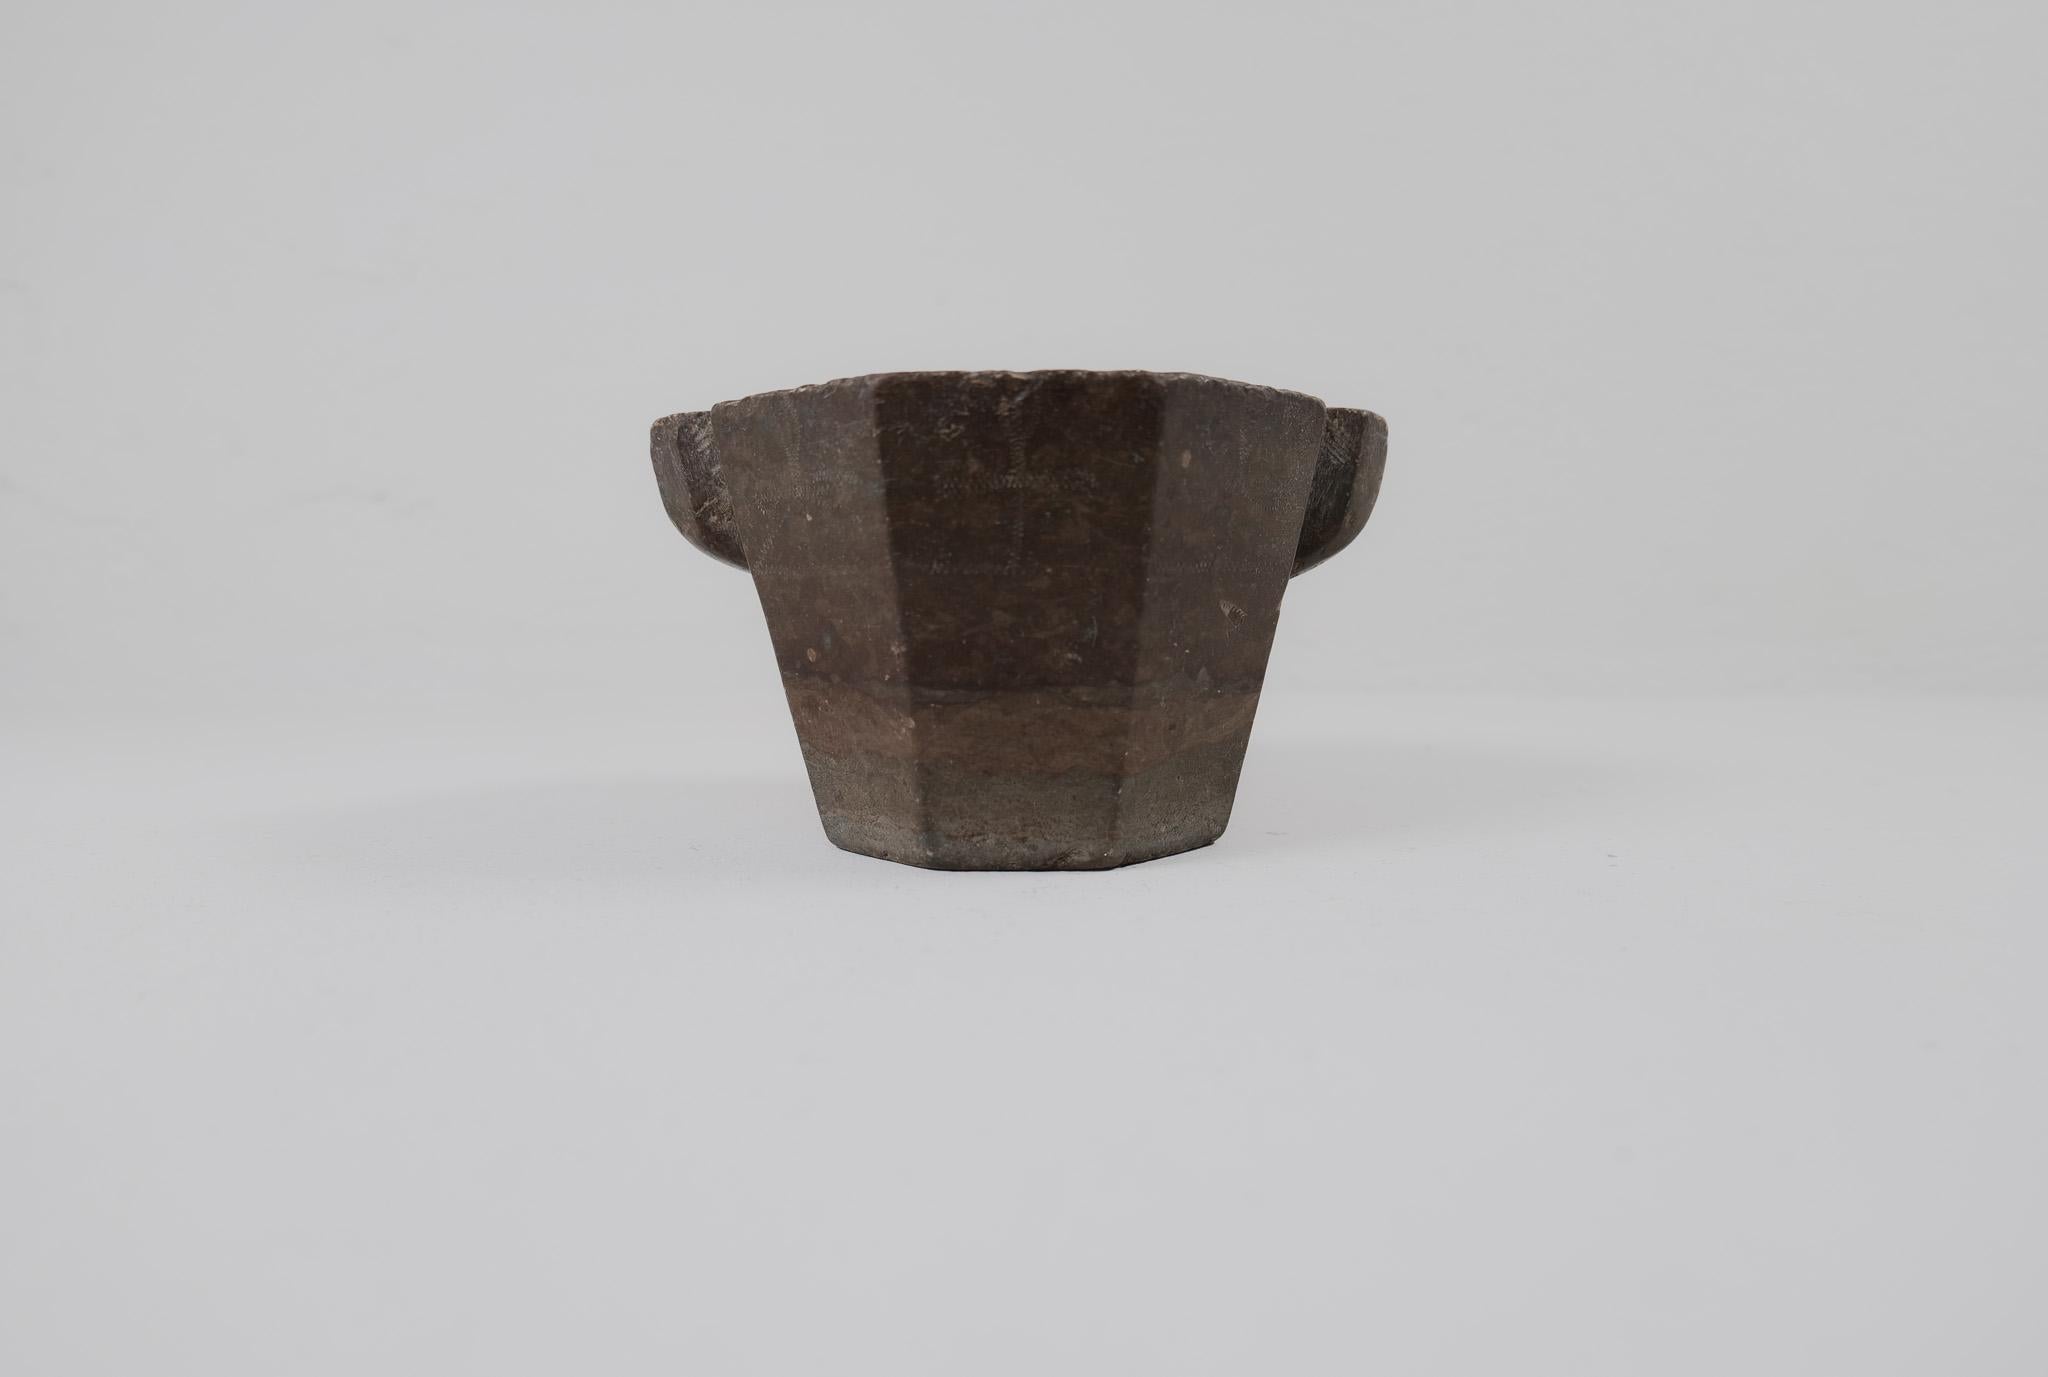 This large and heavy mortar made in stone are perfect for display and interior. Made in Sweden ca 1800s. This unique piece has its origin in the middle of Sweden and its was made with patterns carved into the top of the mortar. 

Good antique